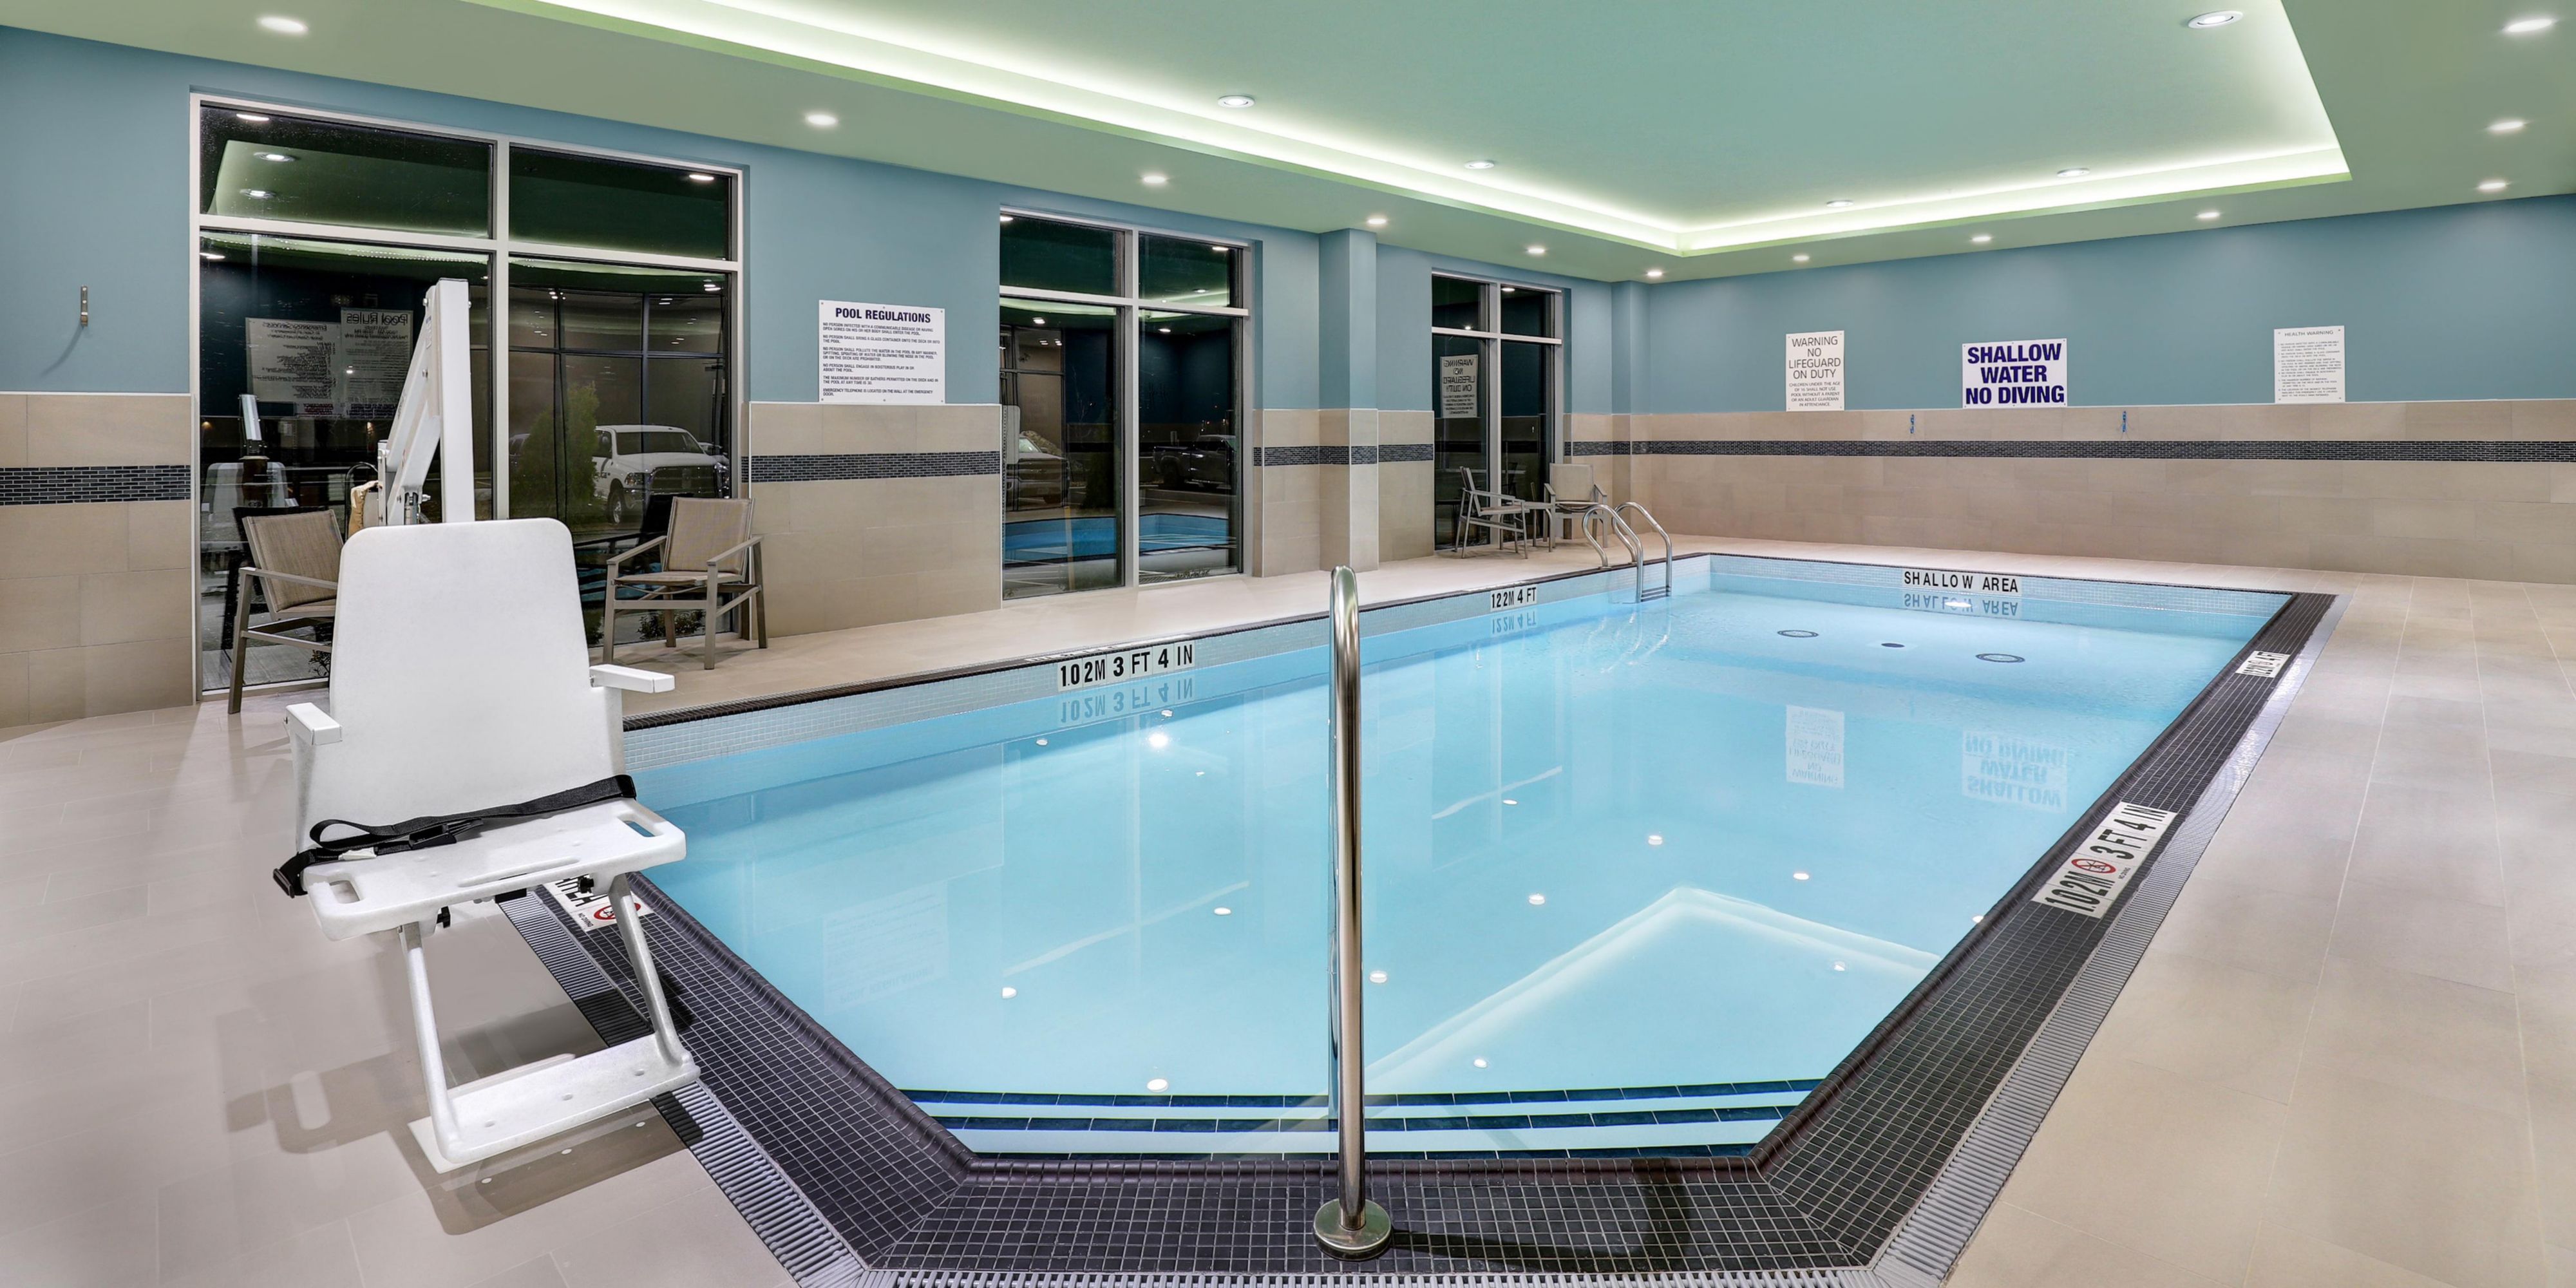 Take a swim in our indoor heated pool. Give us a call to book your reservation.